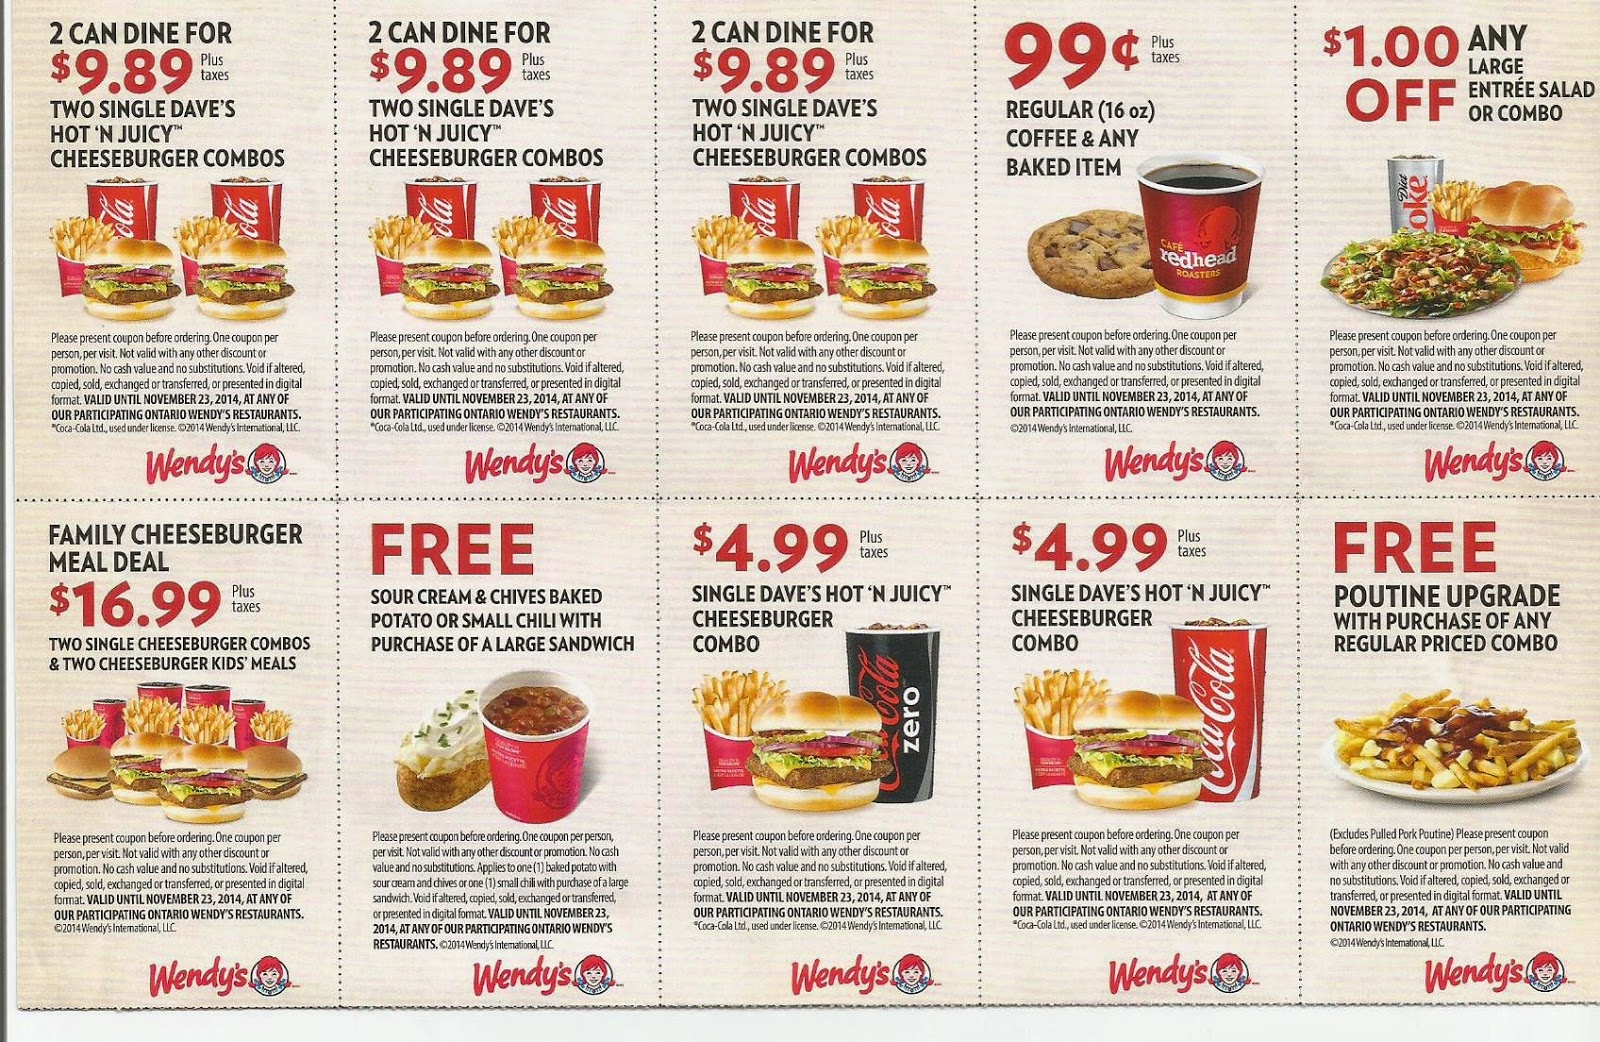 Free Printable Wendys Coupons For 2016 (28) - Free Printable Coupons For Food